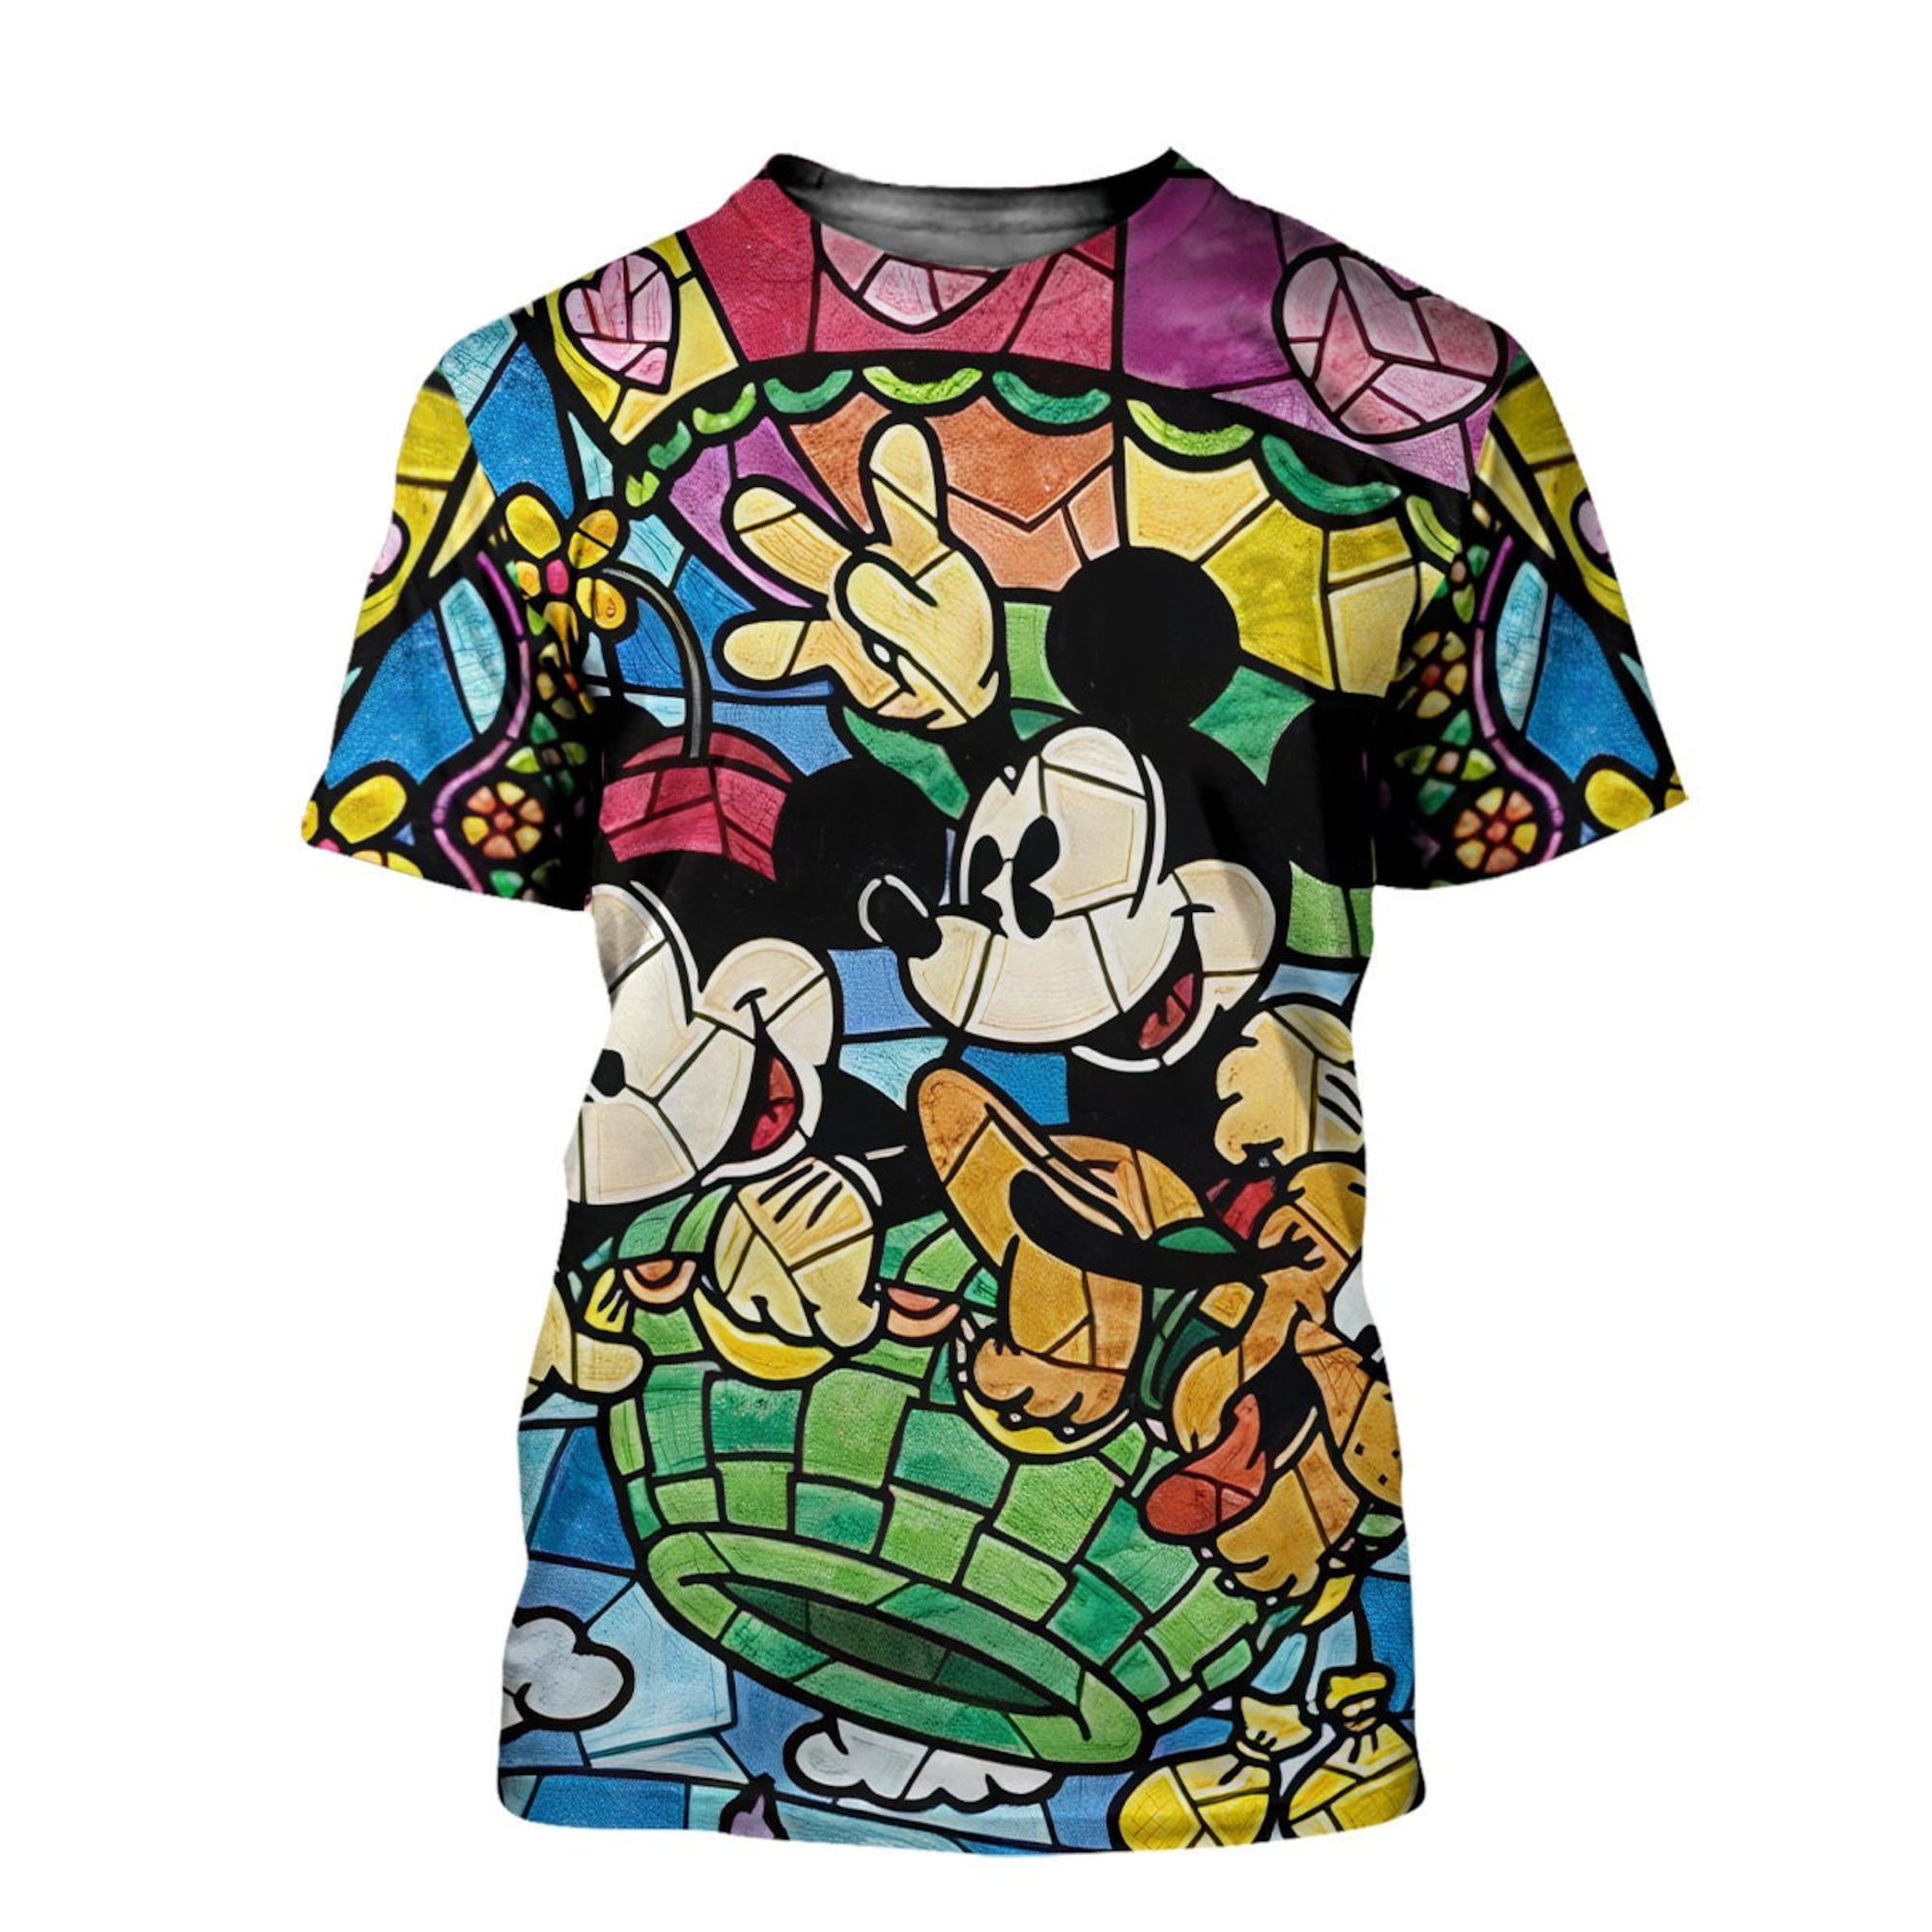 Discover Mickey & Minnie Mouse Geometric Patterns Disney Graphic Cartoon Outfits Unisex All Over Print 3D T-shirts